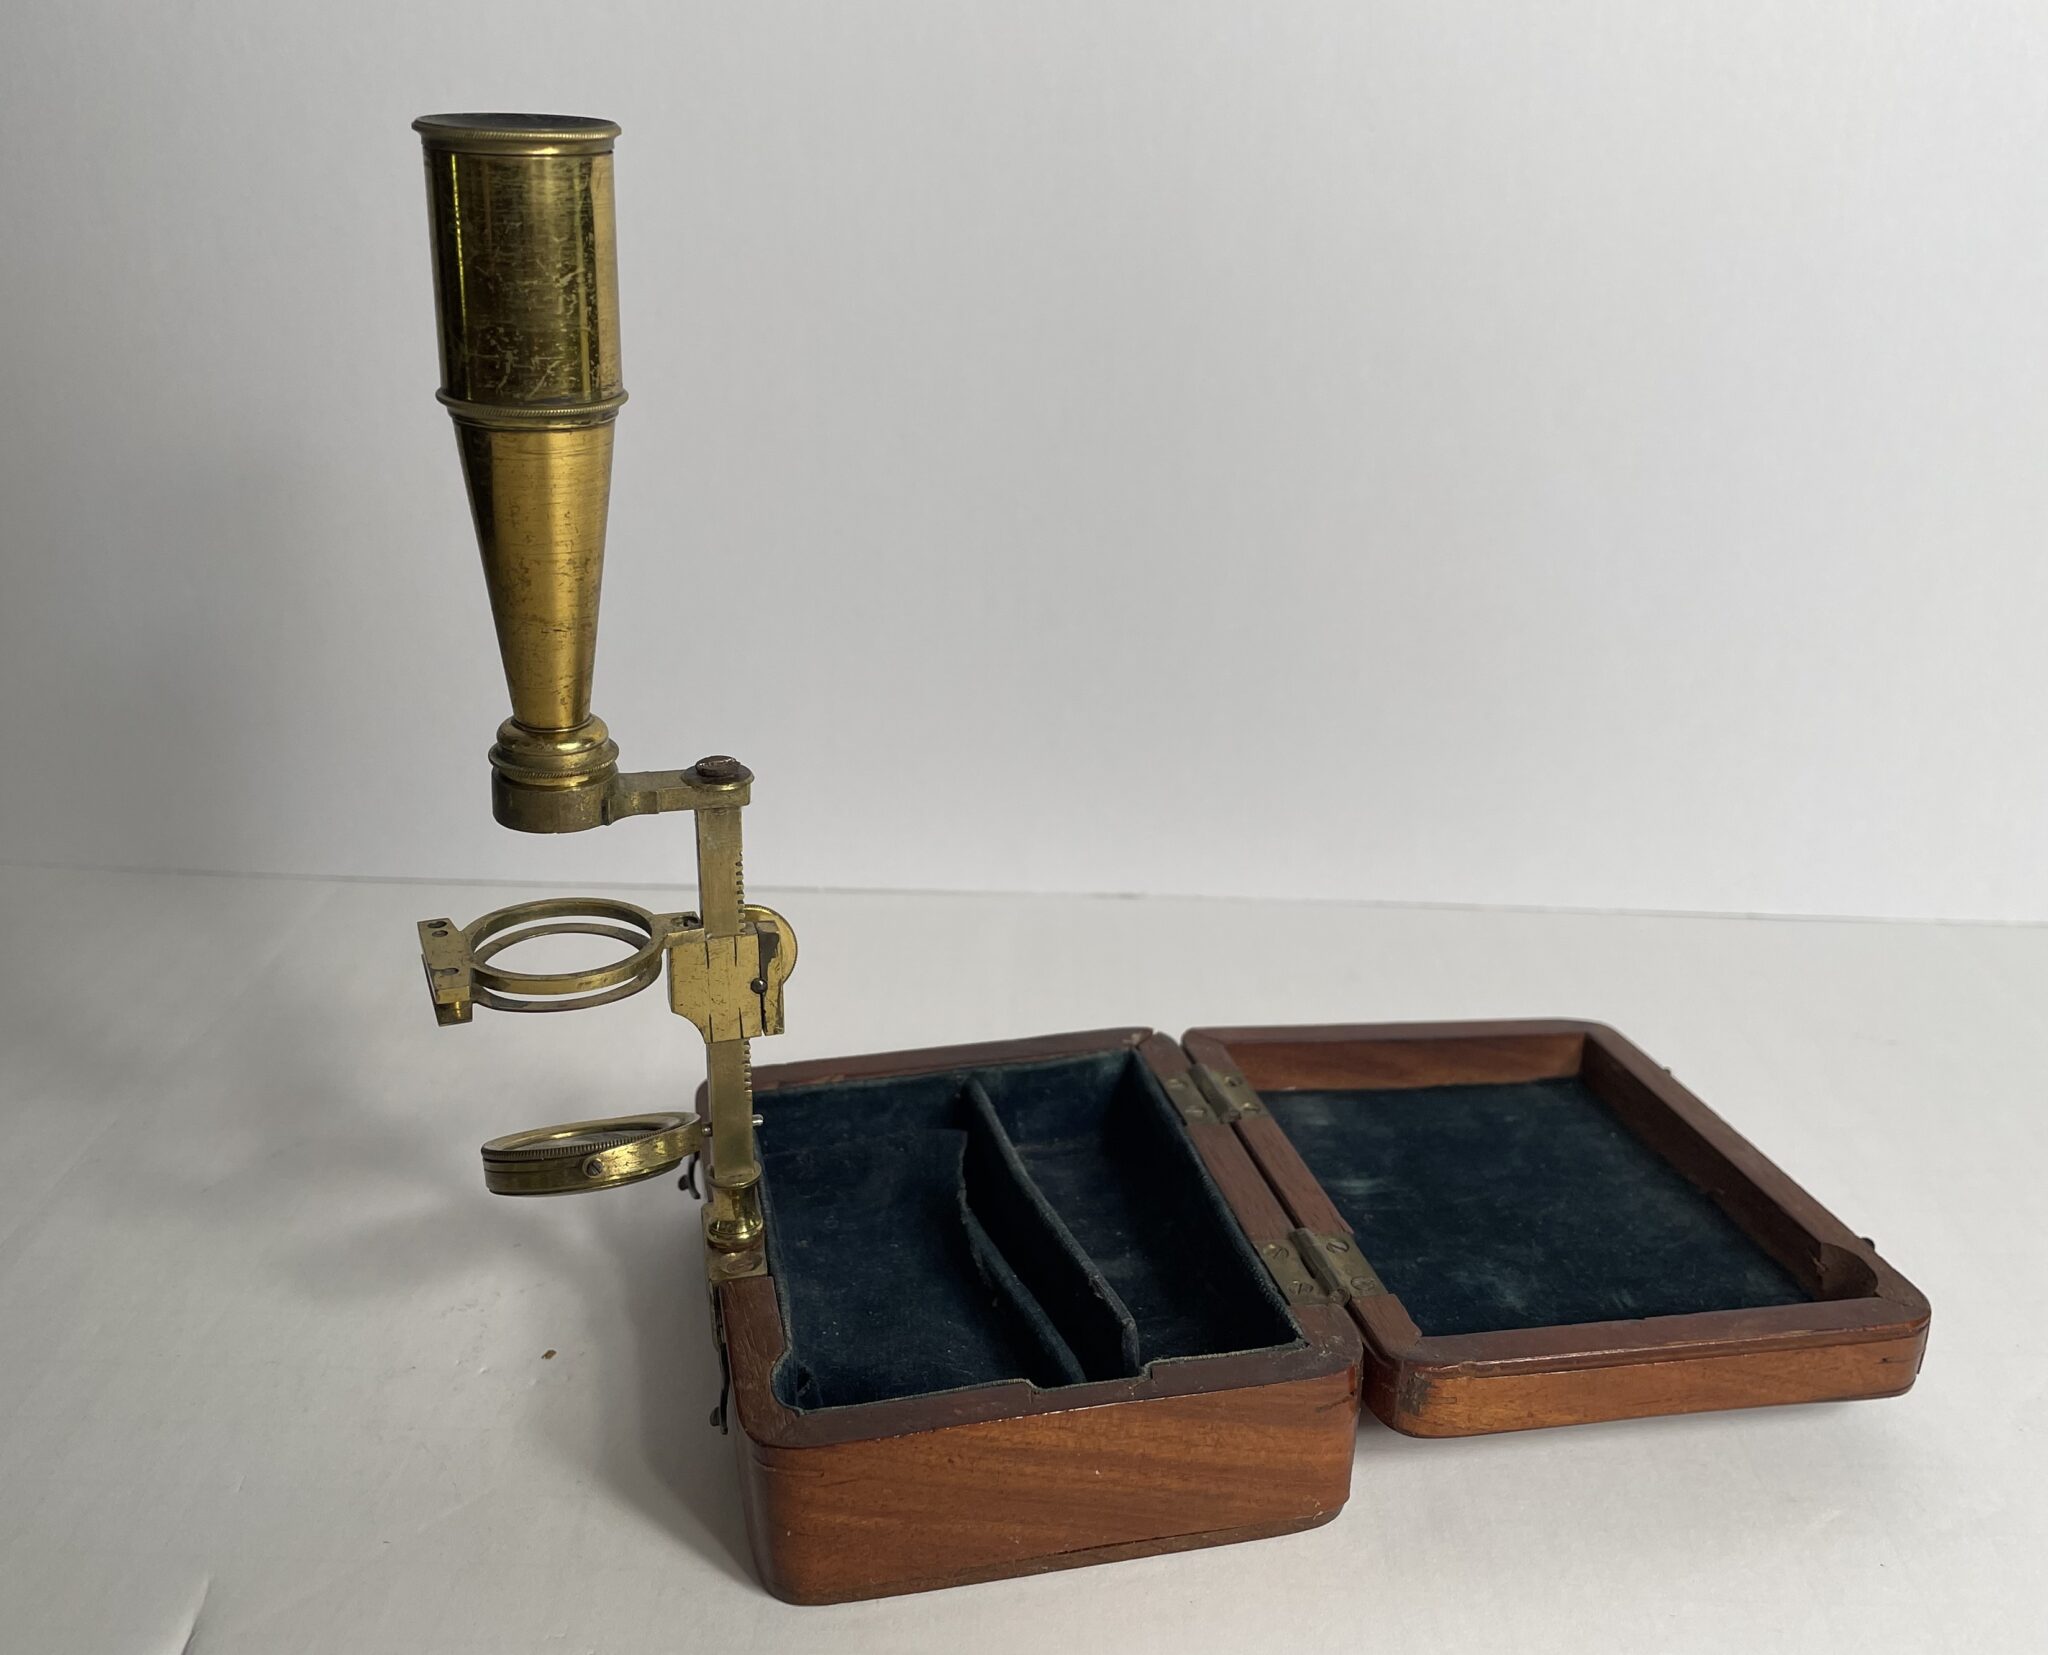 Cary signed Gould type case mounted microscope.